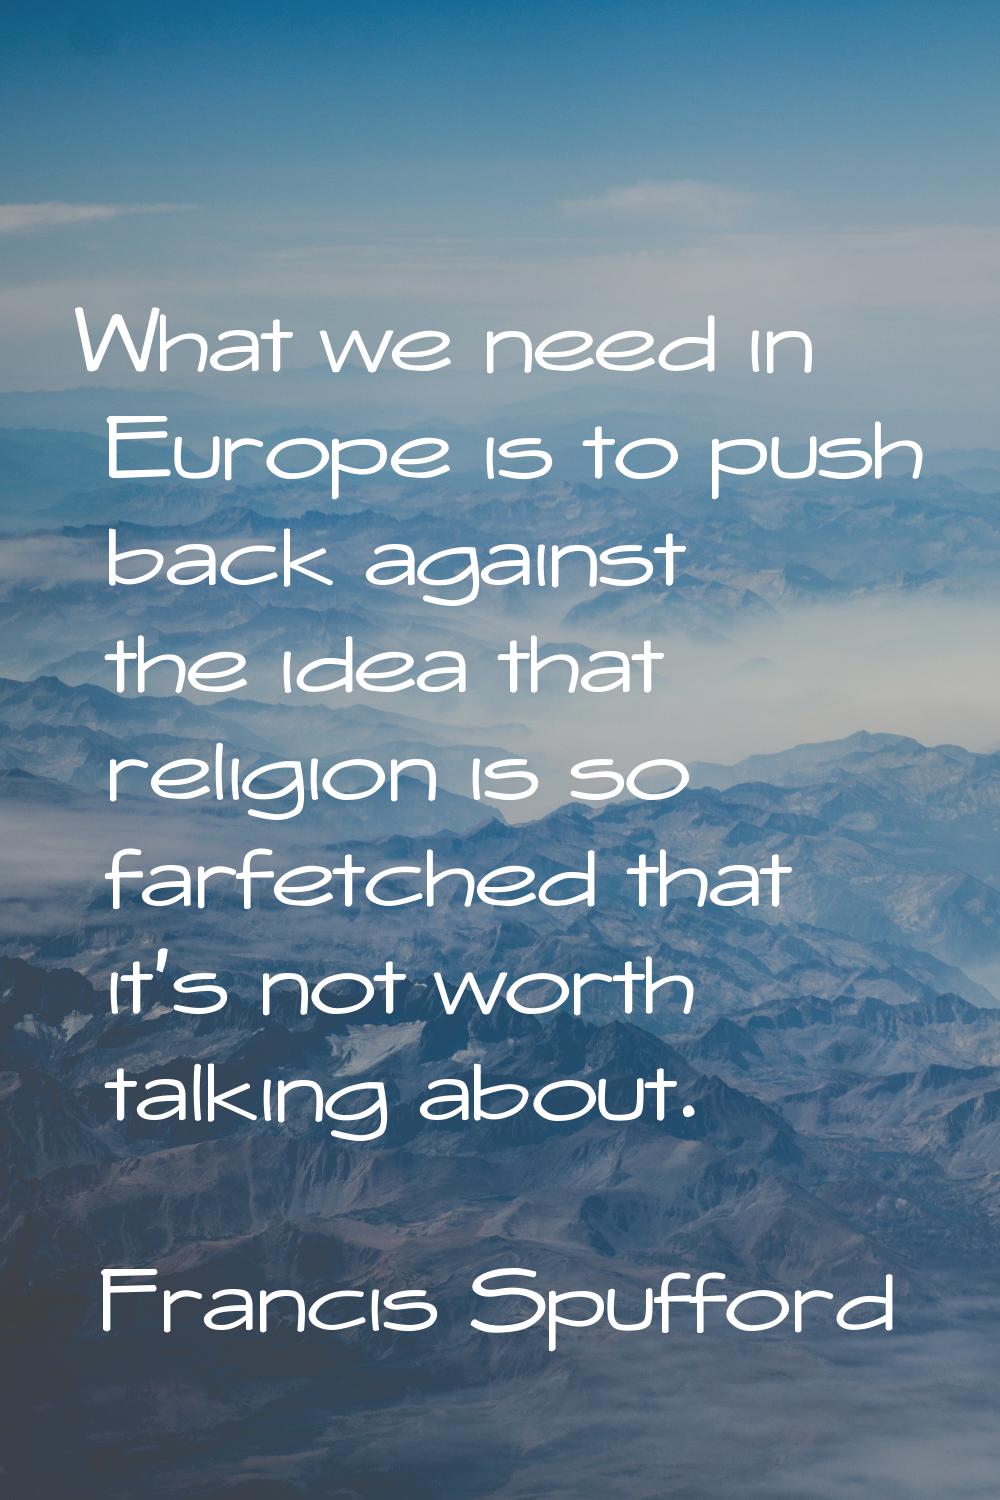 What we need in Europe is to push back against the idea that religion is so farfetched that it's no